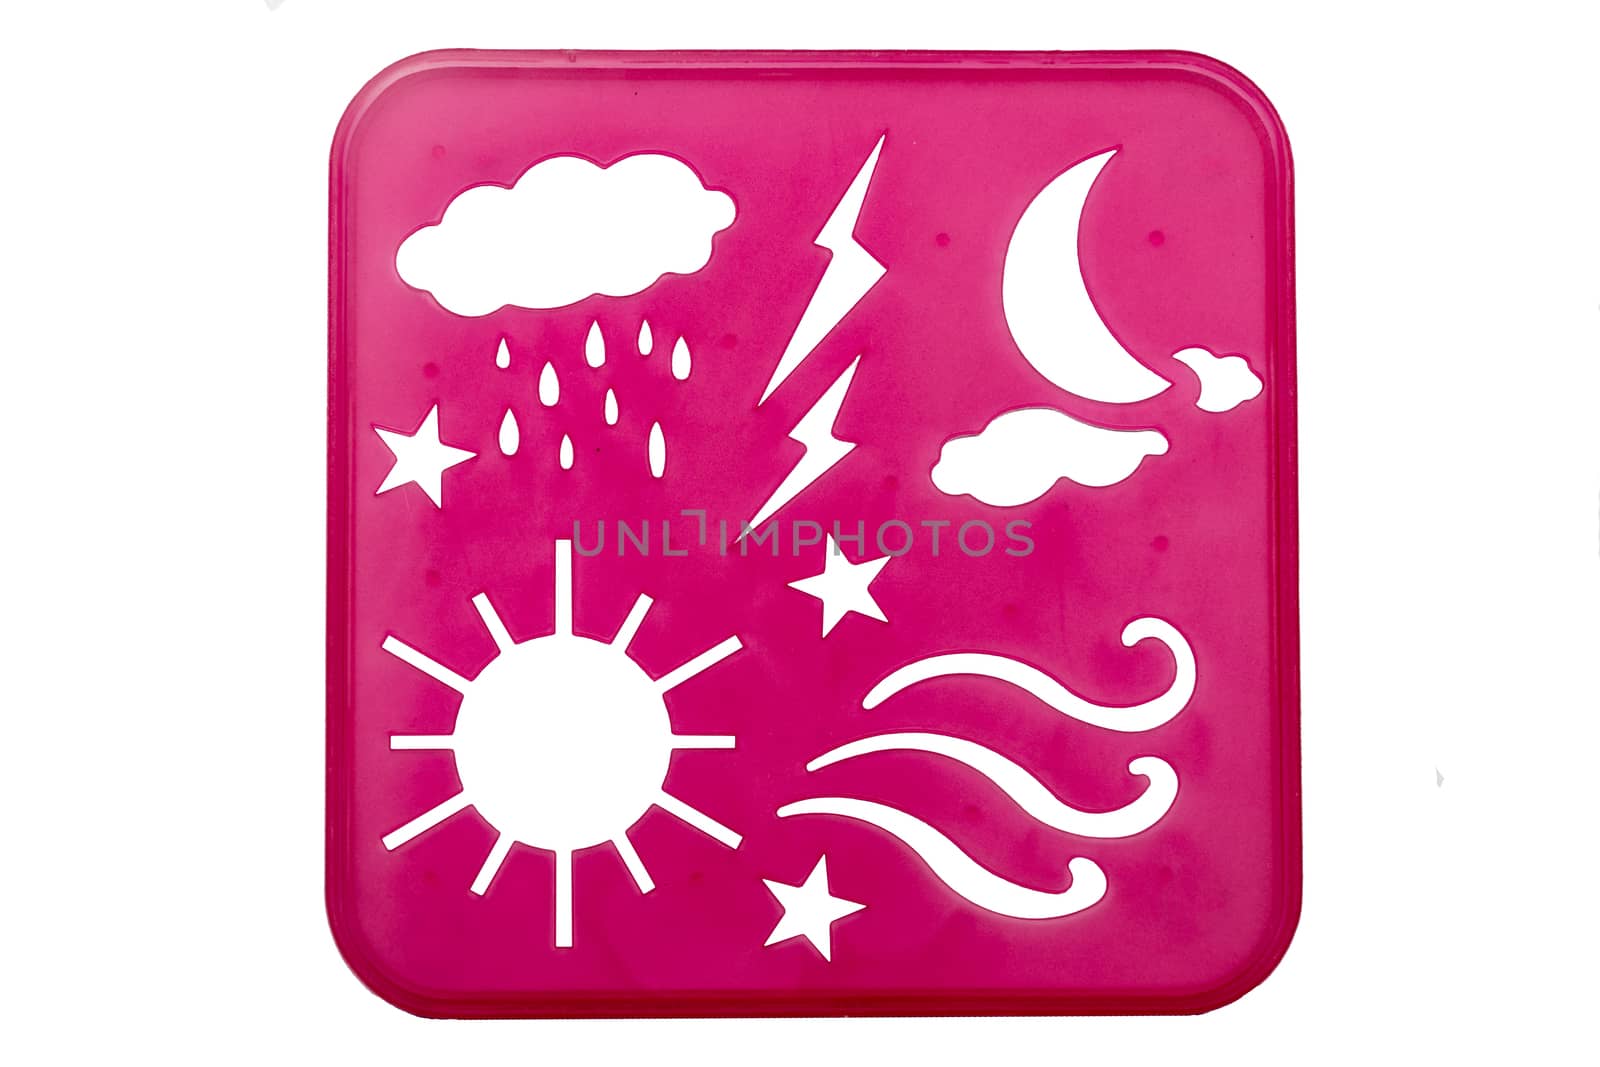 Weather stencil shapes on a pink background